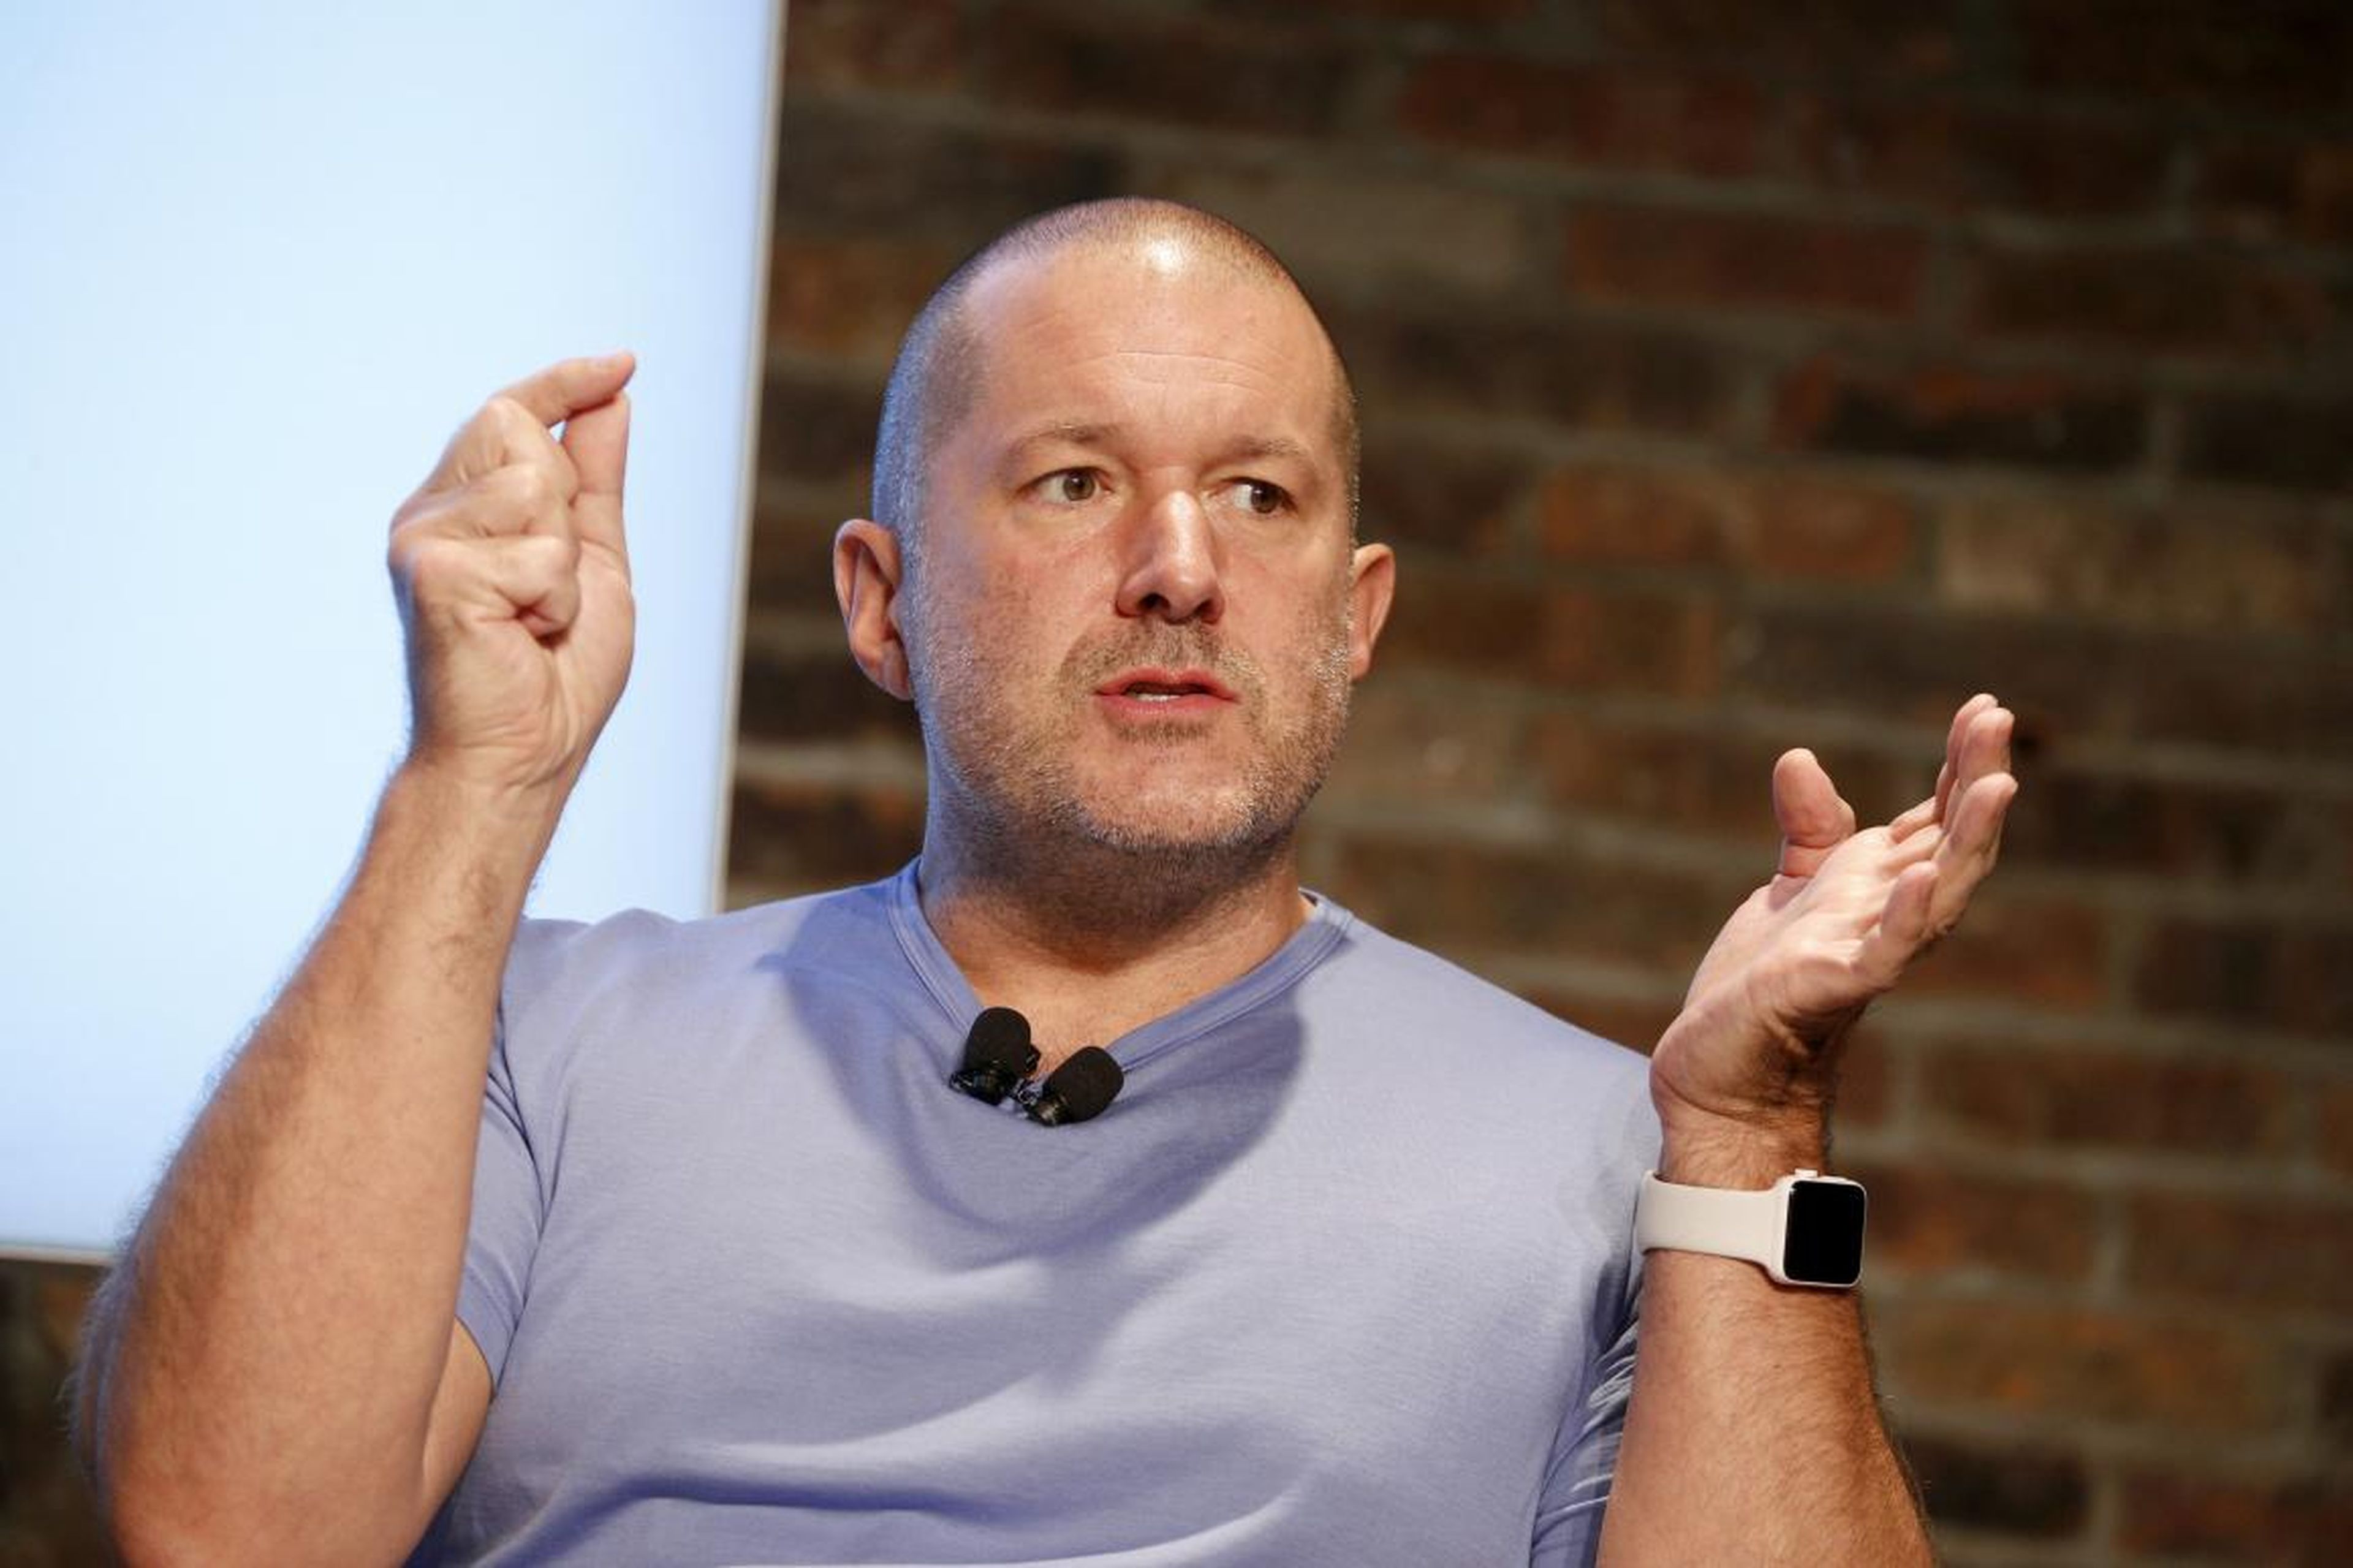 Apple’s design chief Jony Ive also said in 2017 that “there are certain ideas that we have and we are waiting for the technology to catch up with the idea.”